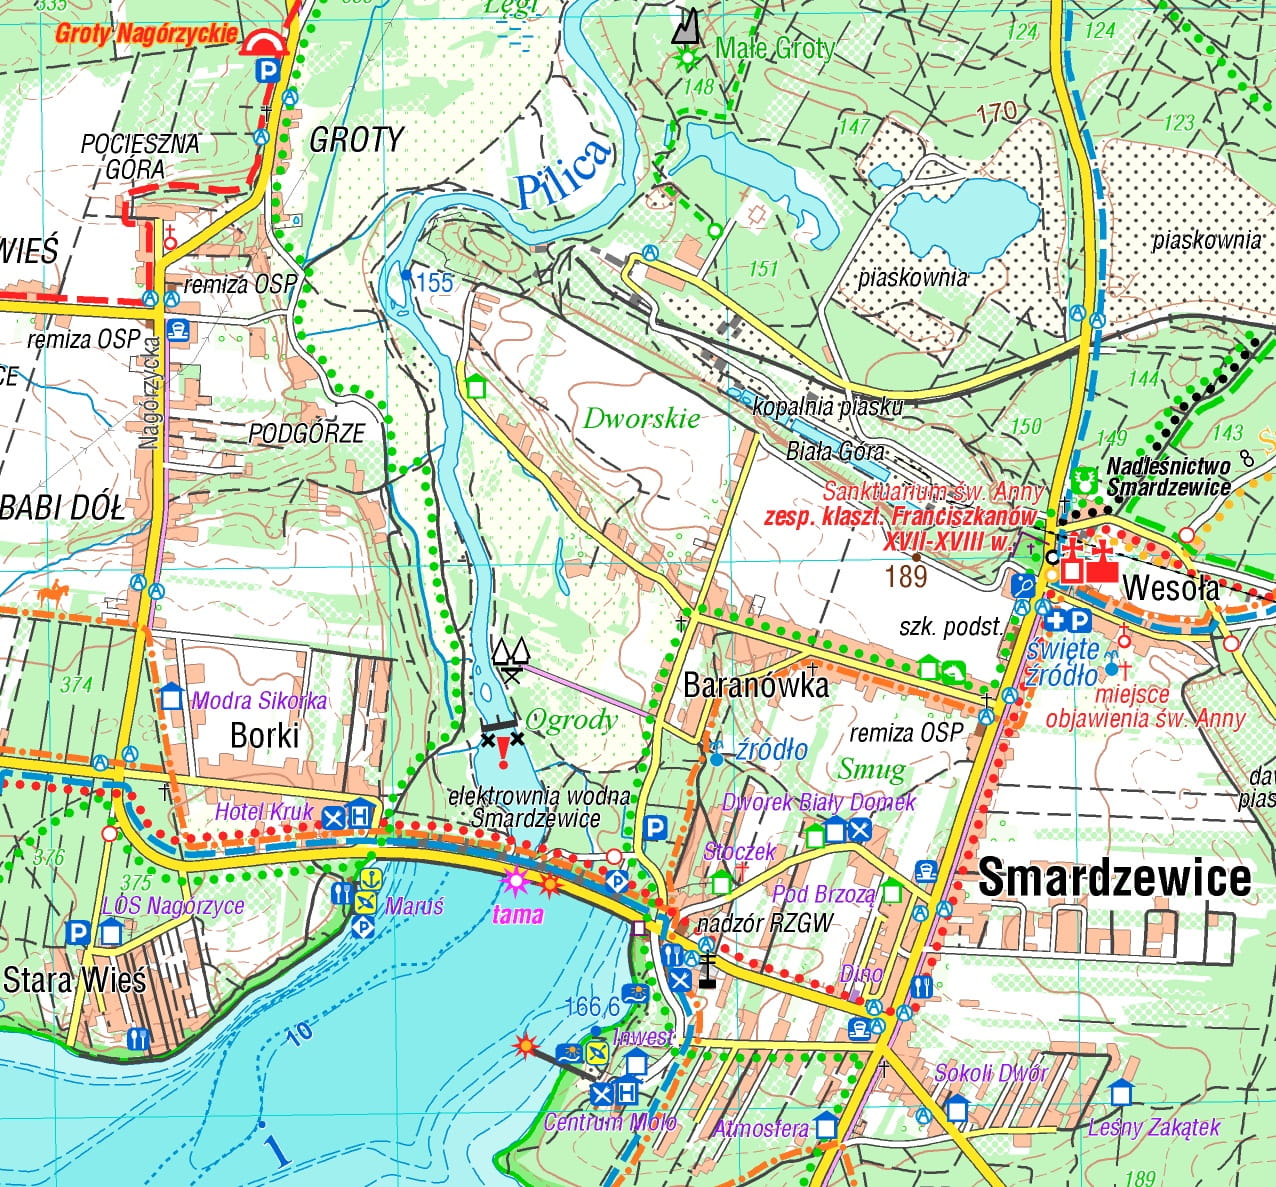 The Sulejowski Reservoir and surroundings